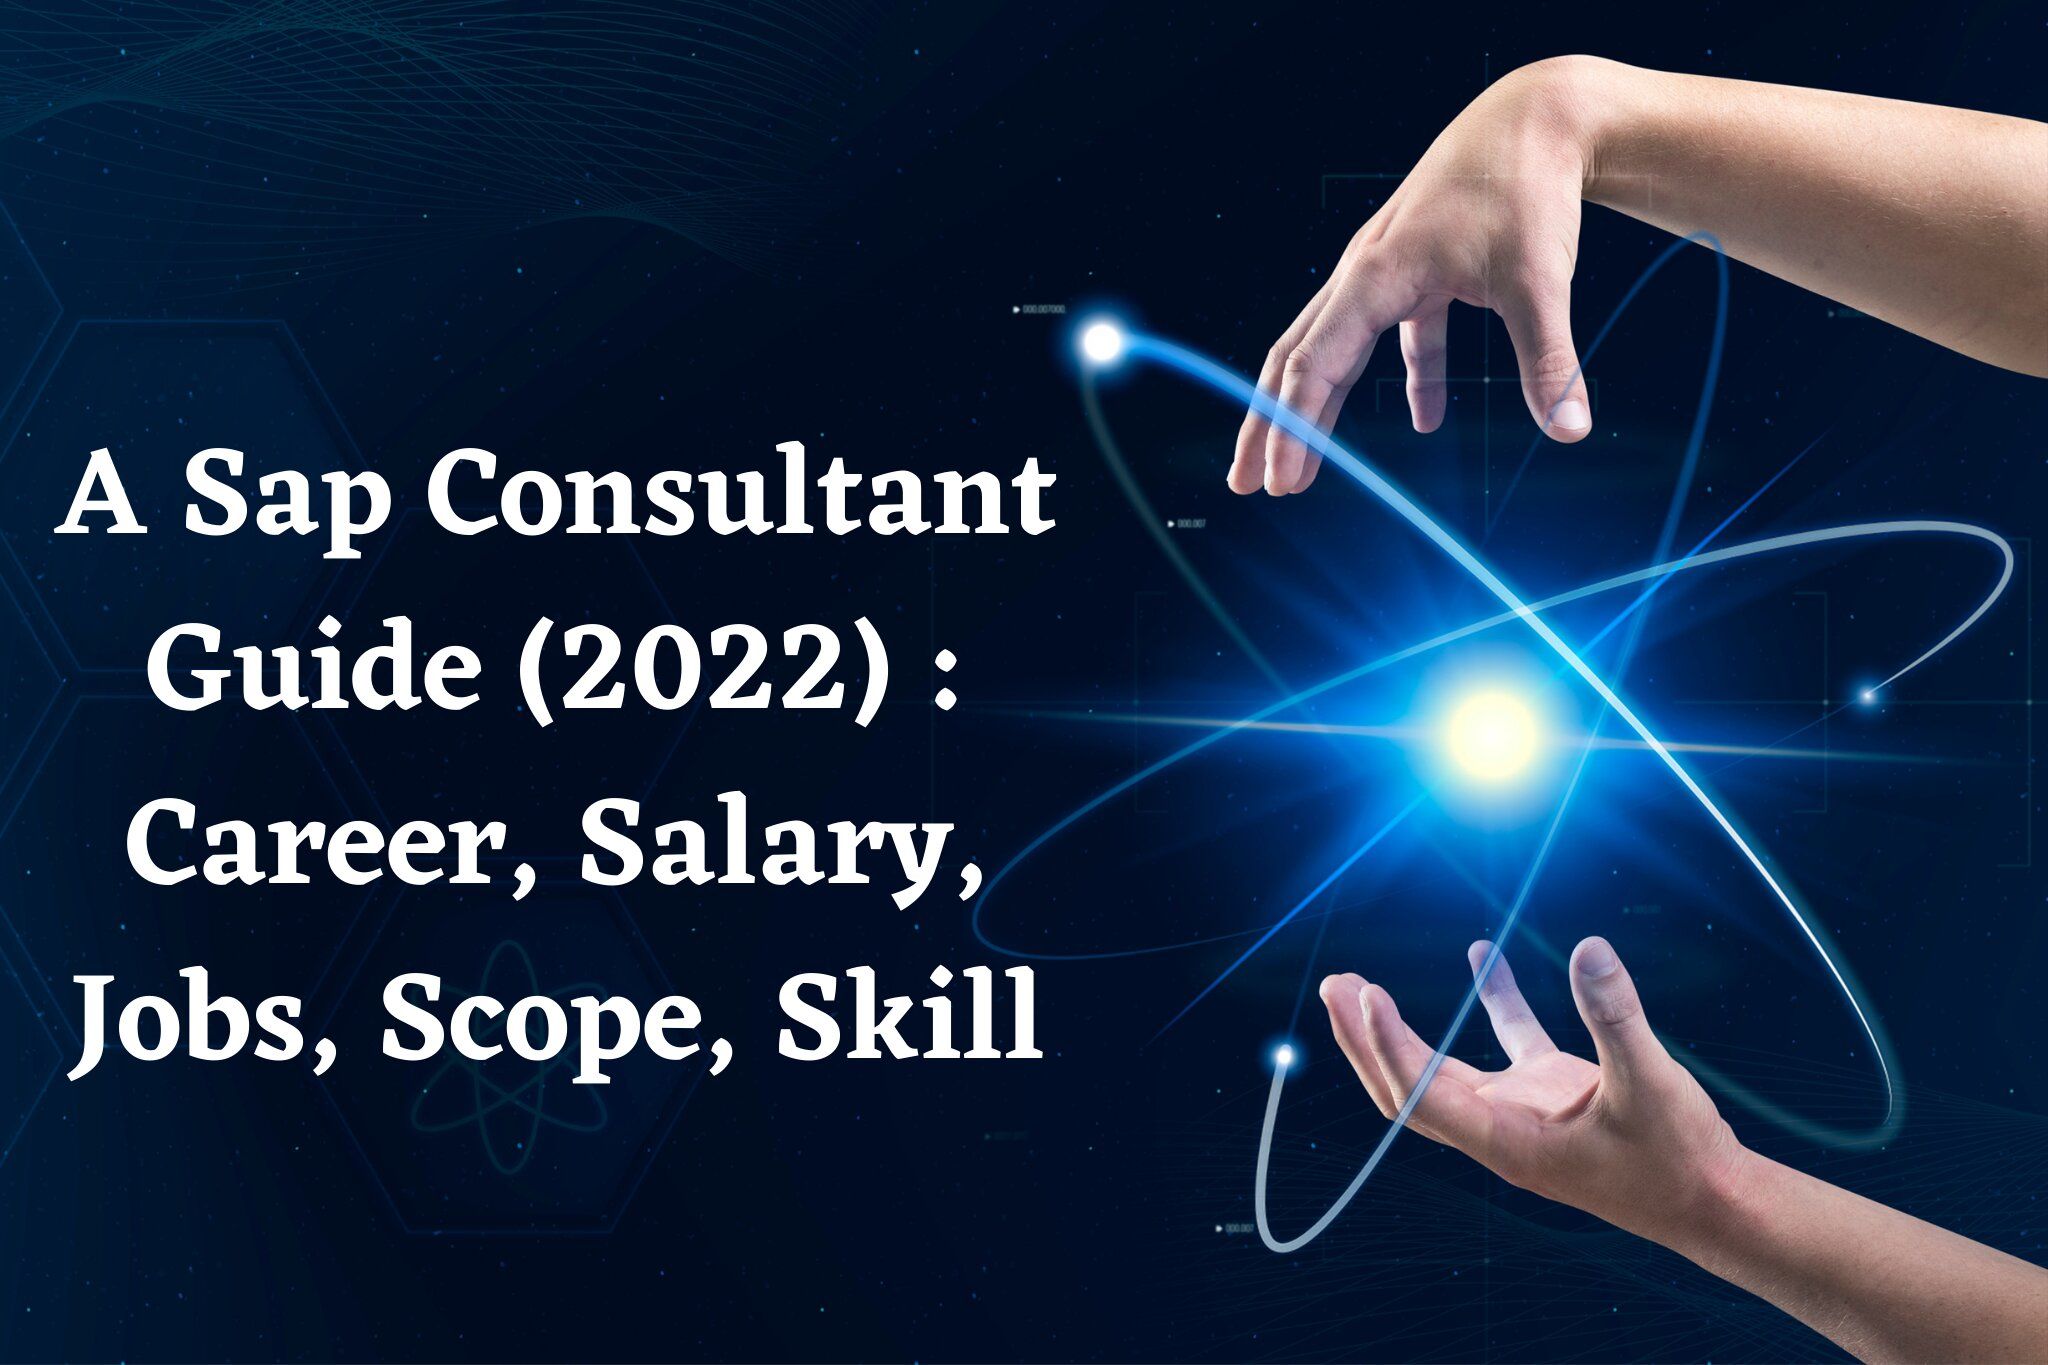 A Sap Consultant Guide 2022 : Career, Salary, Jobs, Scope, Skills